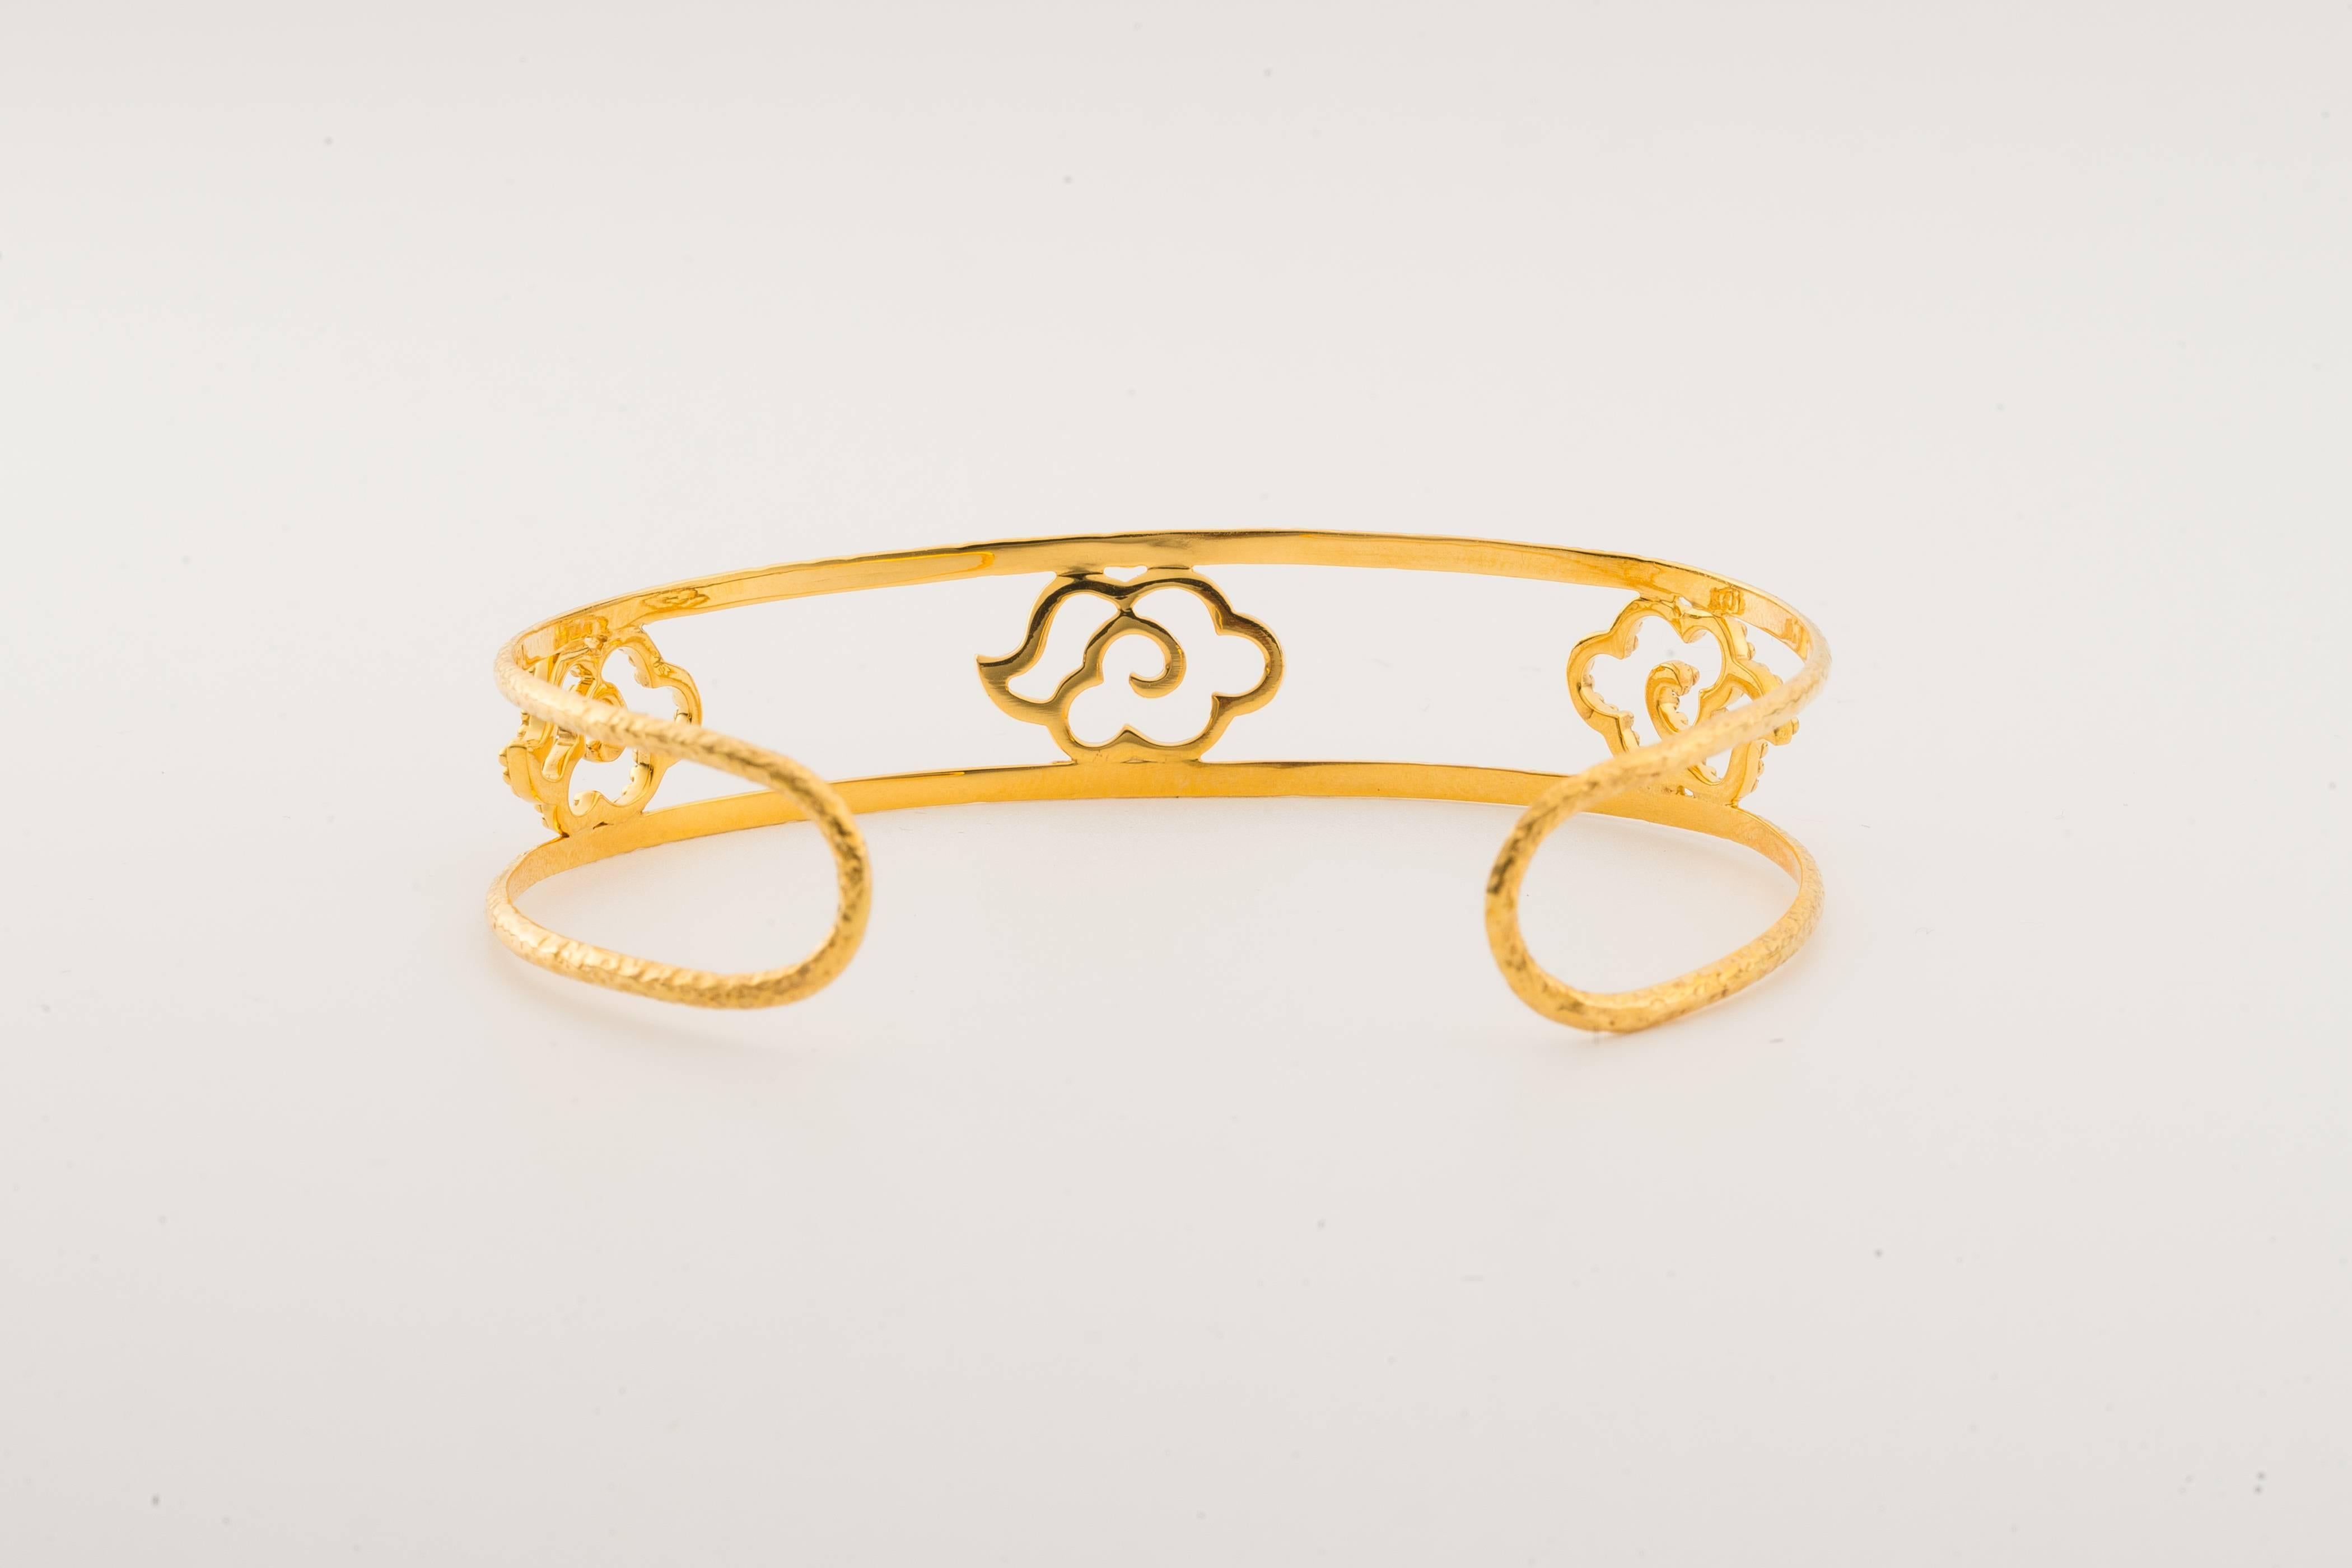 The hand-worked 18-Karat gold cuff is from our Heritage Collection of Chinoiserie designs, height ½ in (1.3cmH), the hand-hammered openwork cuff is decorated with cloud motifs (weight 11.32gm)
The cuff is flexible with a circumference that will